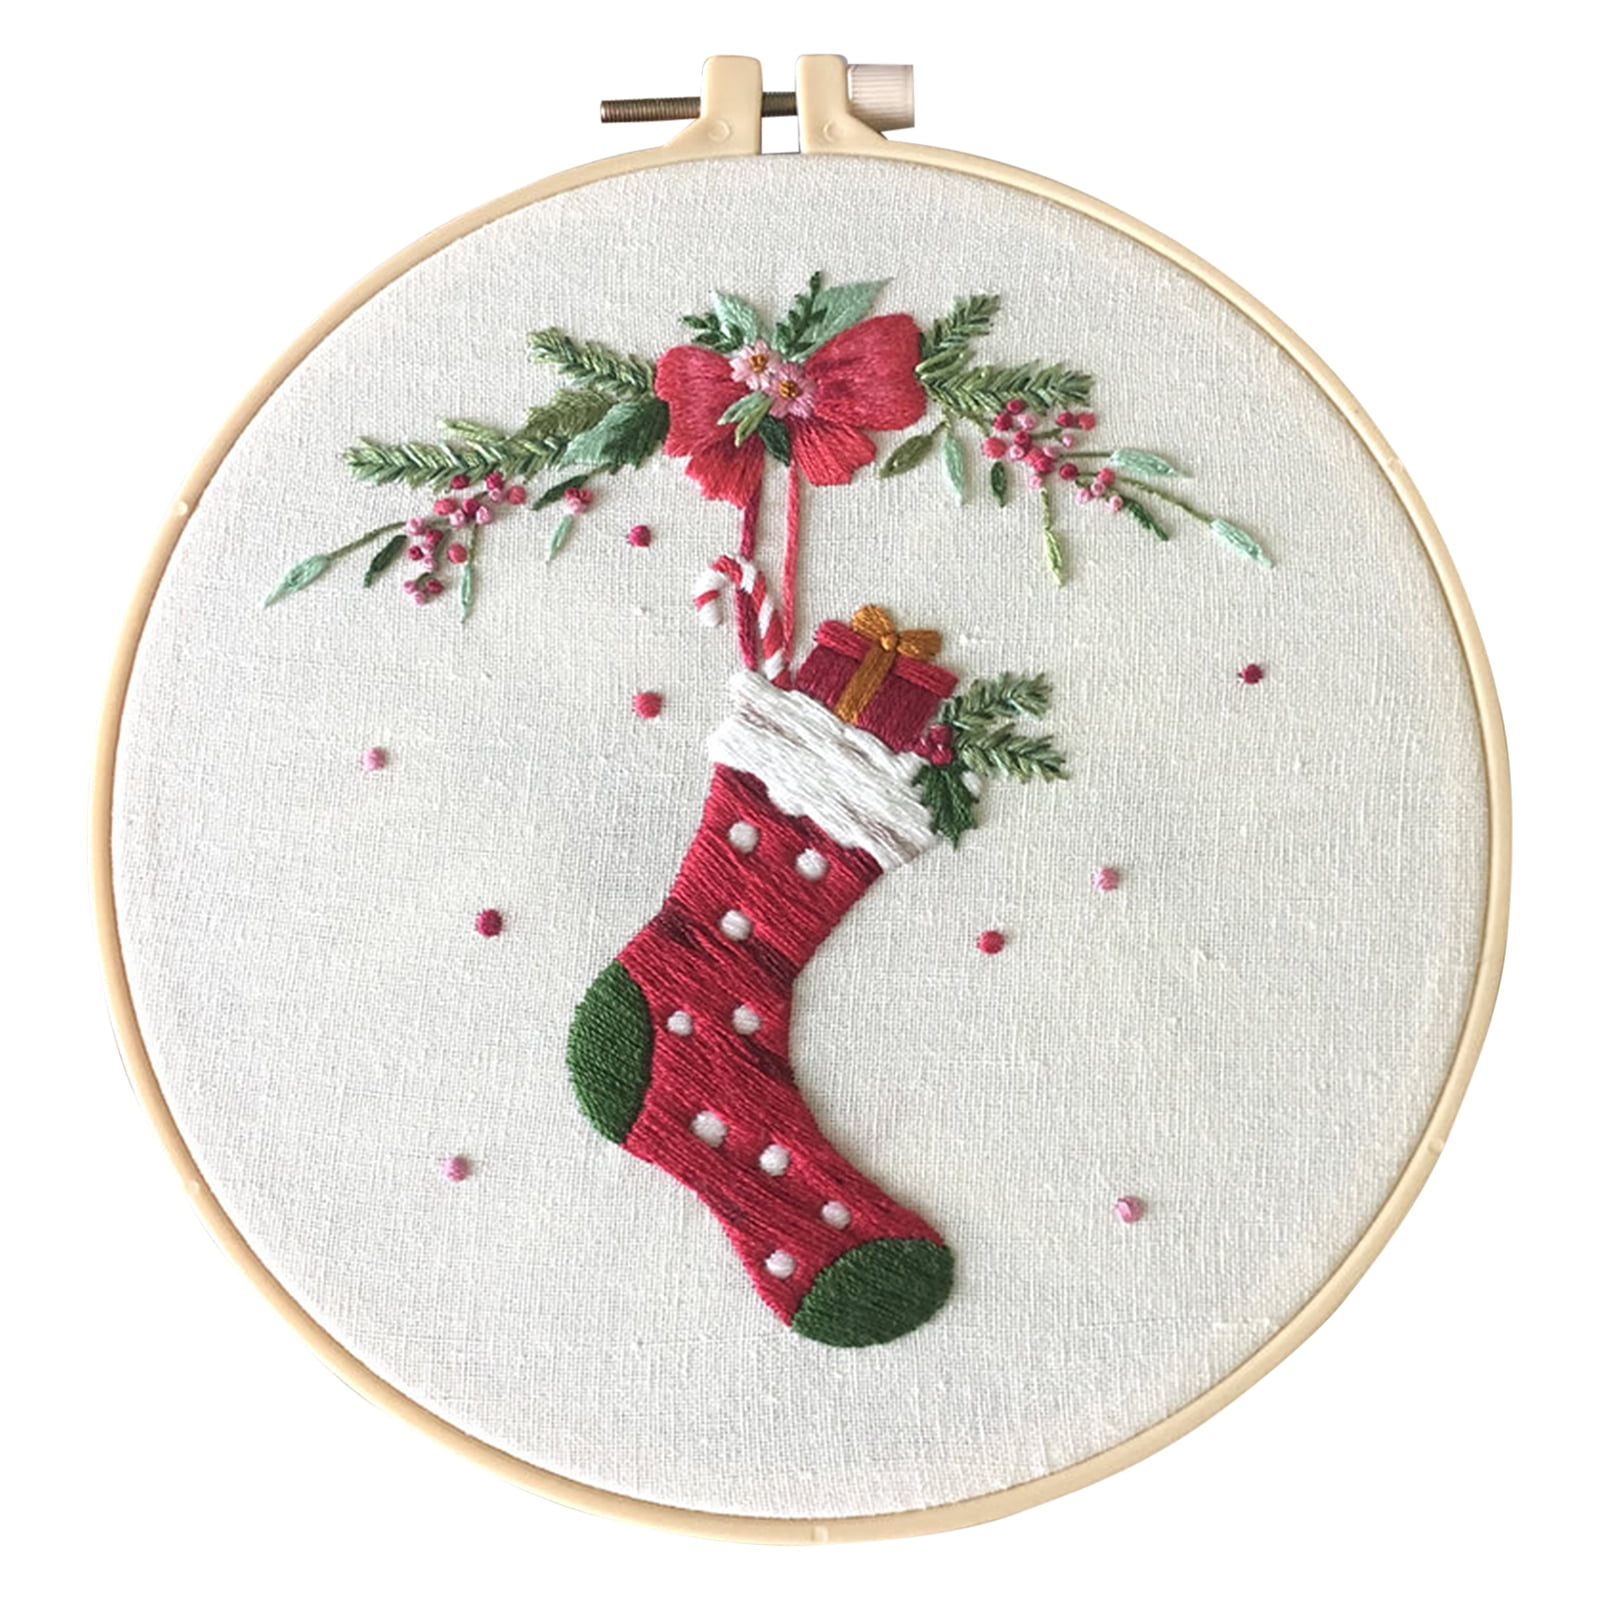 Christmas Diy Embroidery Starter Set With Pattern Include Embroidery Clothes With Christmas Themed Pattern Plastic Embroidery Hoops Color Threads Tools 4 Types Walmart Com